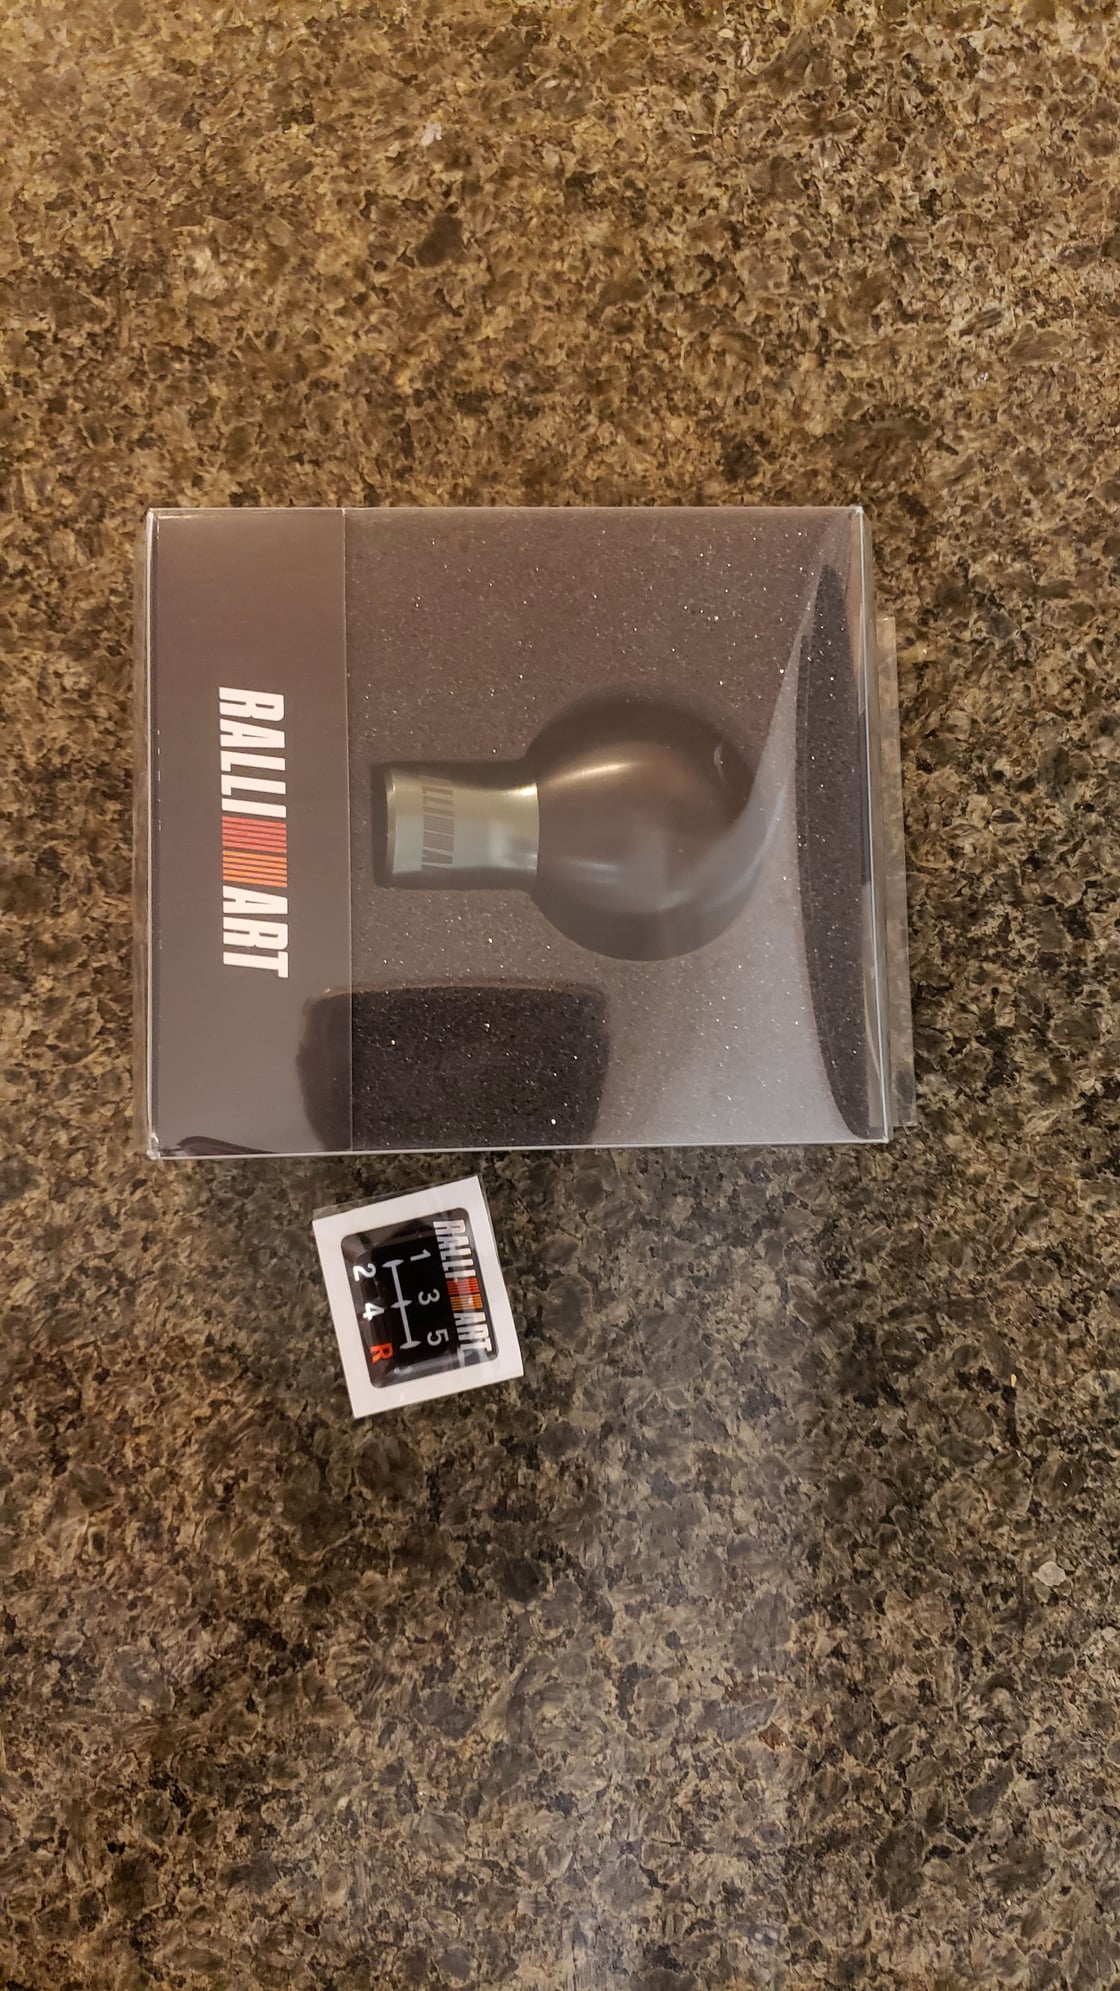 Interior/Upholstery - Rare Discontinued Ralliart Shift Knob - Used - Los Angeles, CA 90011, United States